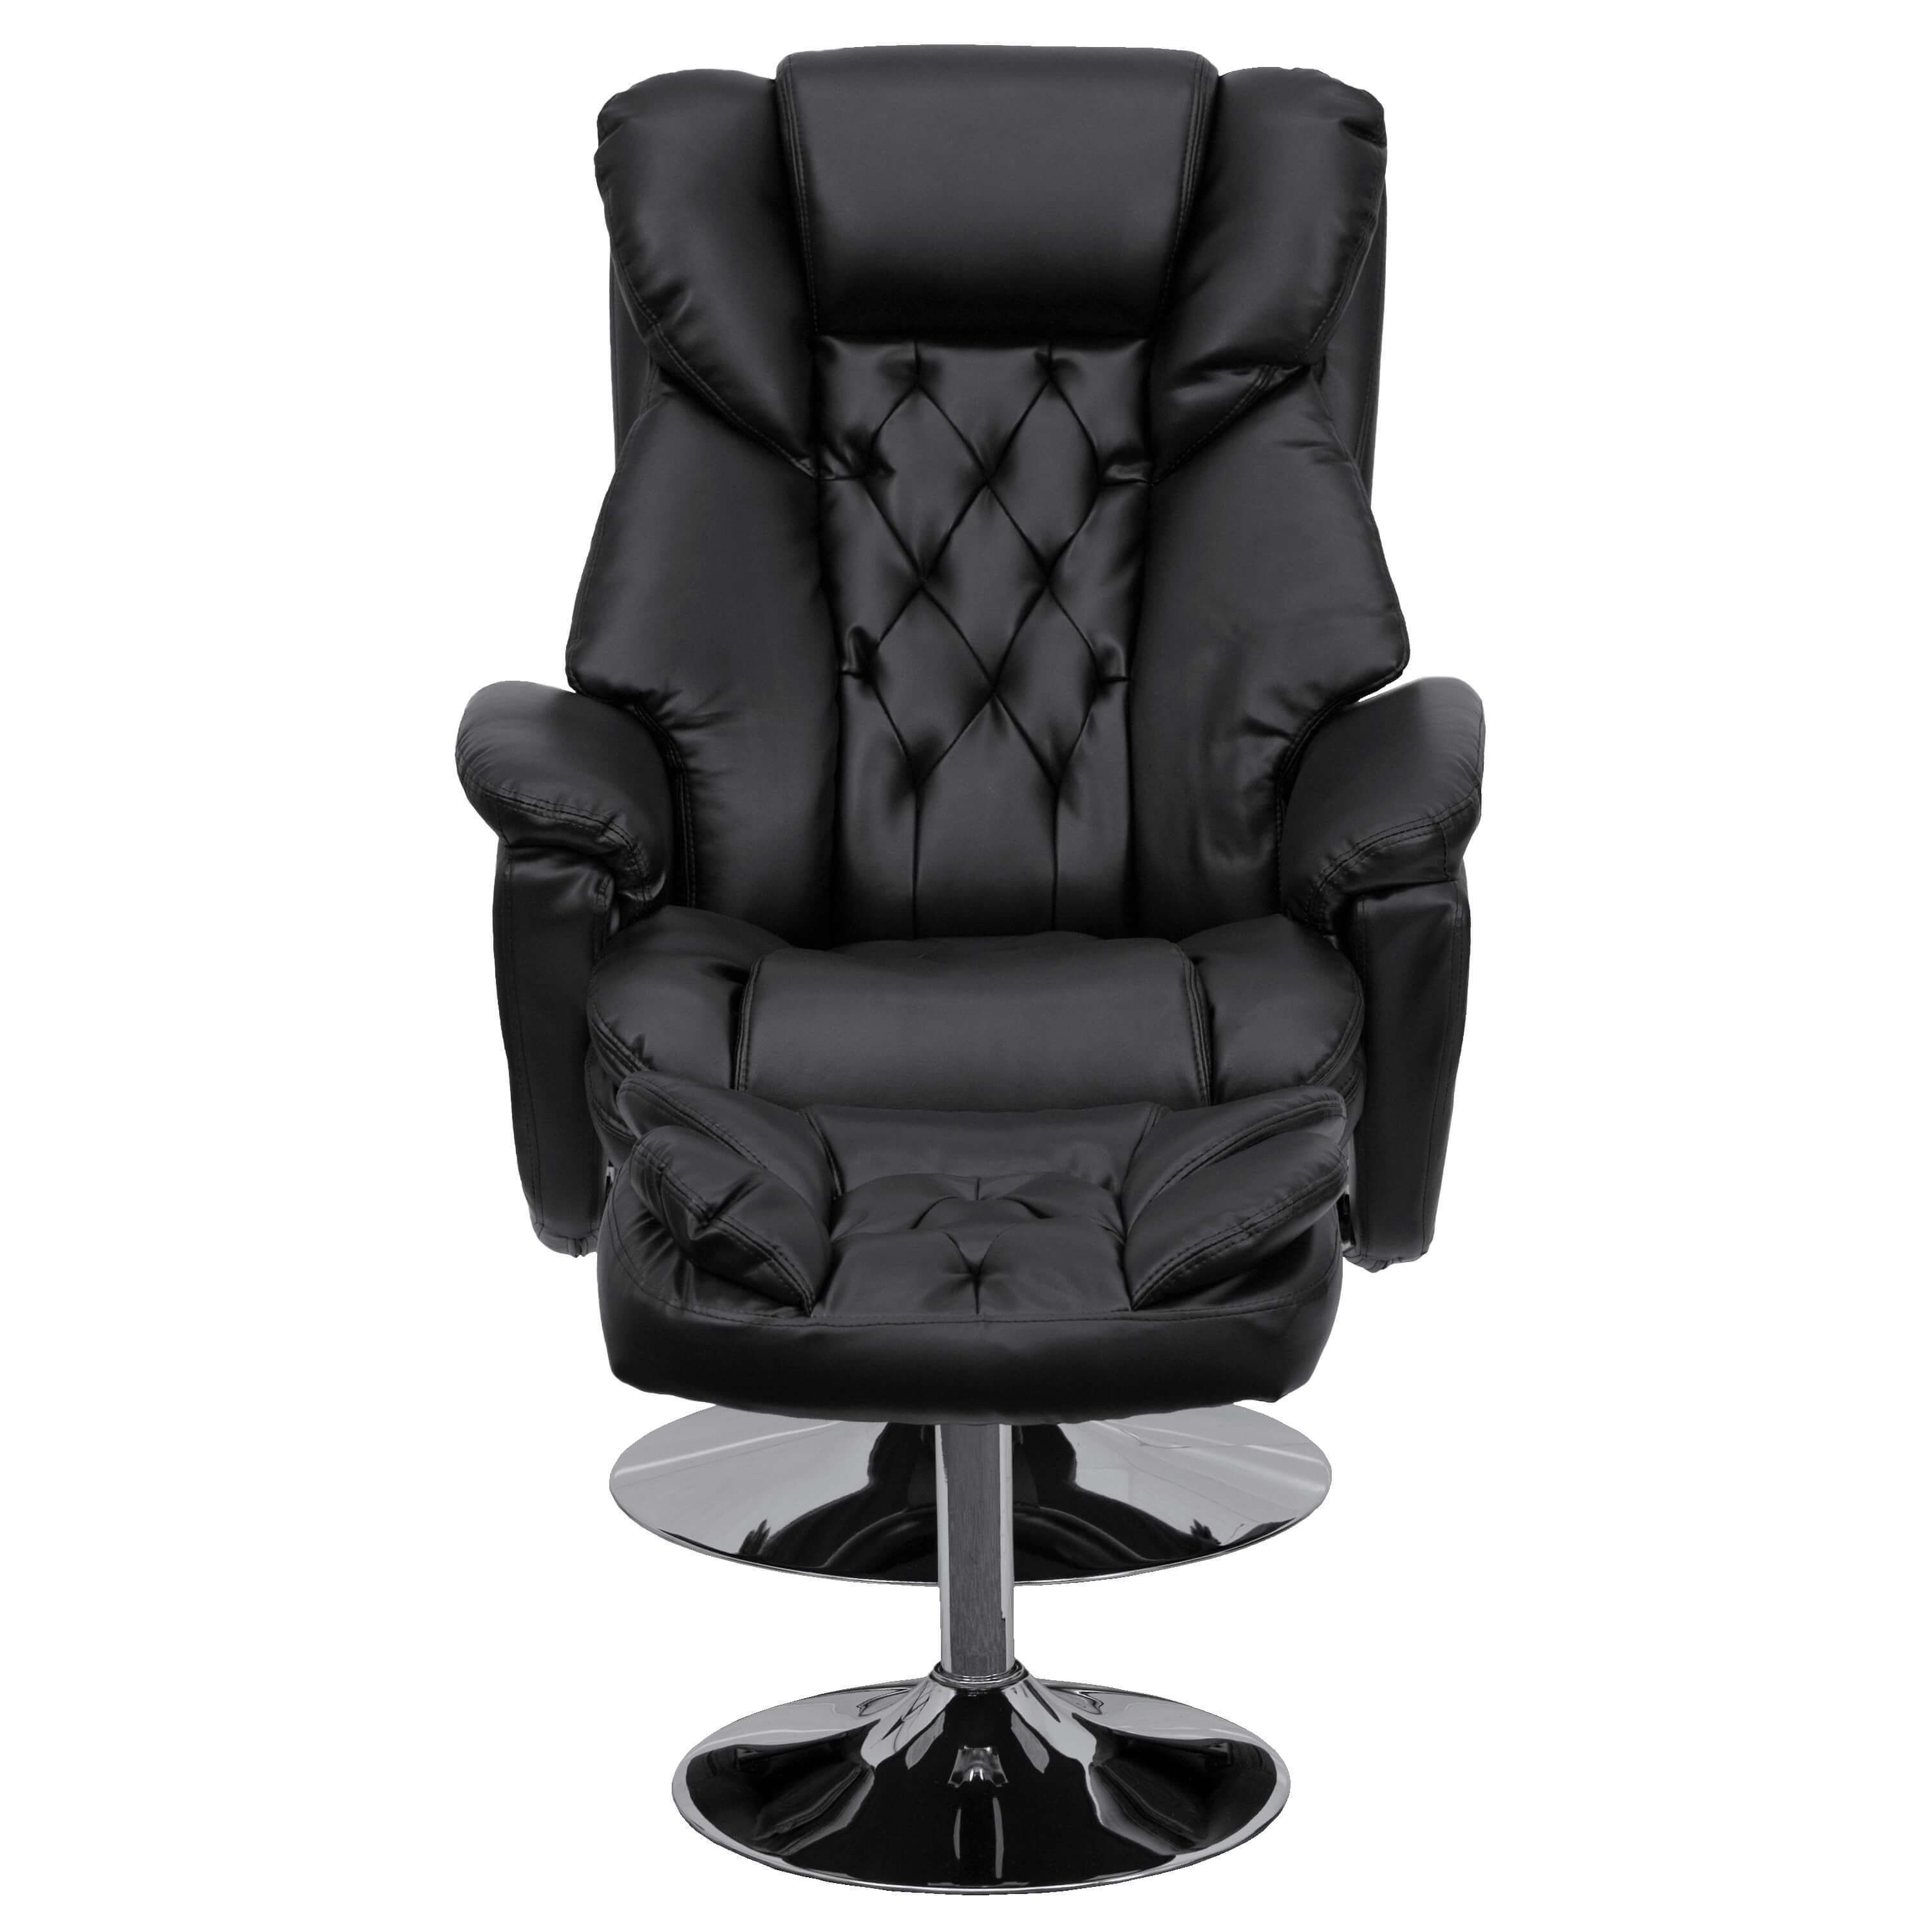 Black leather recliner chair front view